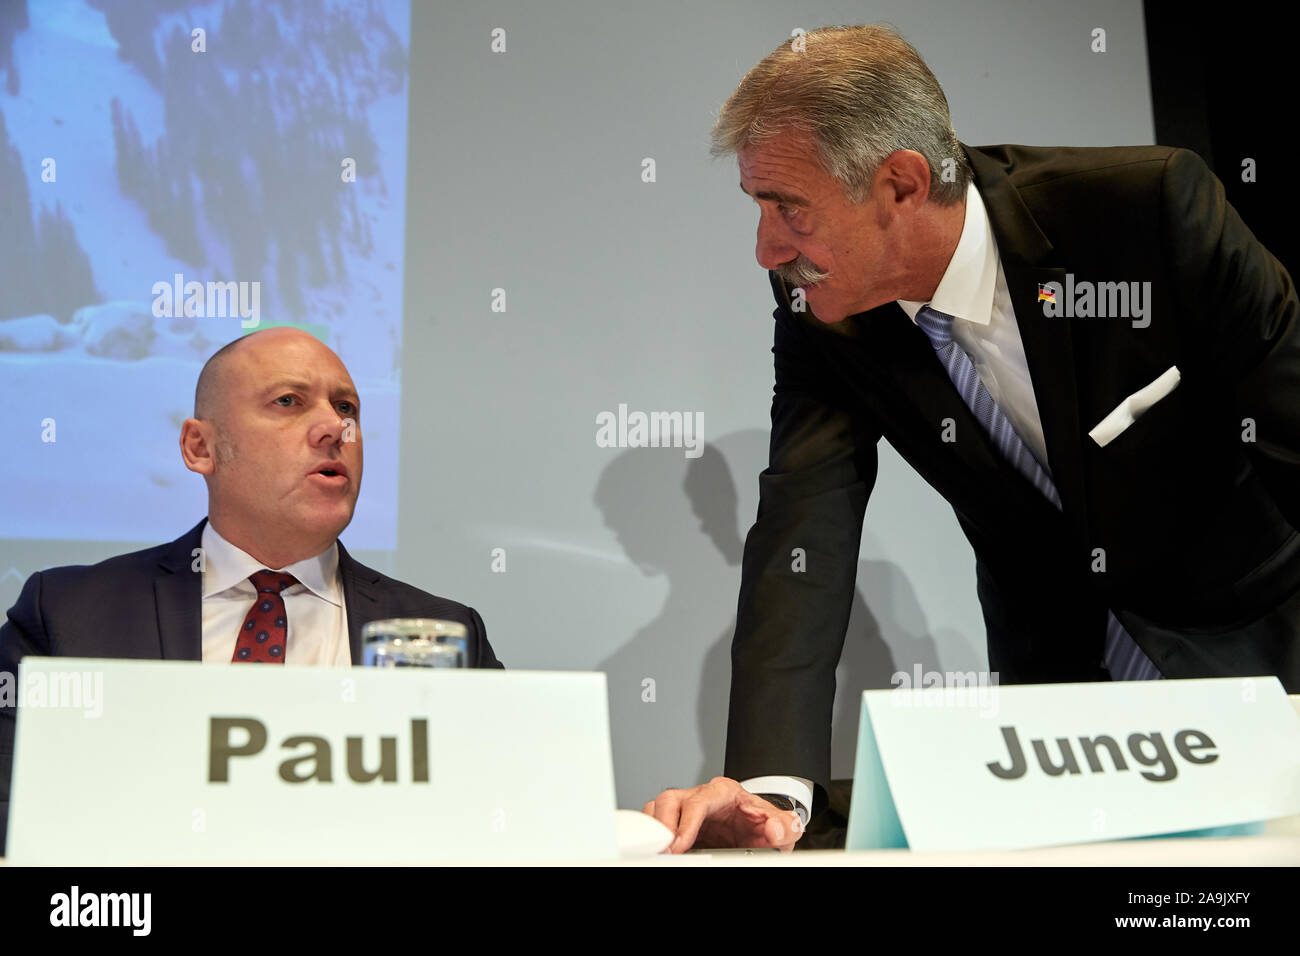 Bingen, Germany. 16th Nov, 2019. The previous deputy state chairman Joachim Paul (l) speaks with the acting state chairman Uwe Junge at the state party conference of the AfD Rhineland-Palatinate. Paul cancelled his candidacy for the presidency at short notice. Credit: Thomas Frey/dpa/Alamy Live News Stock Photo